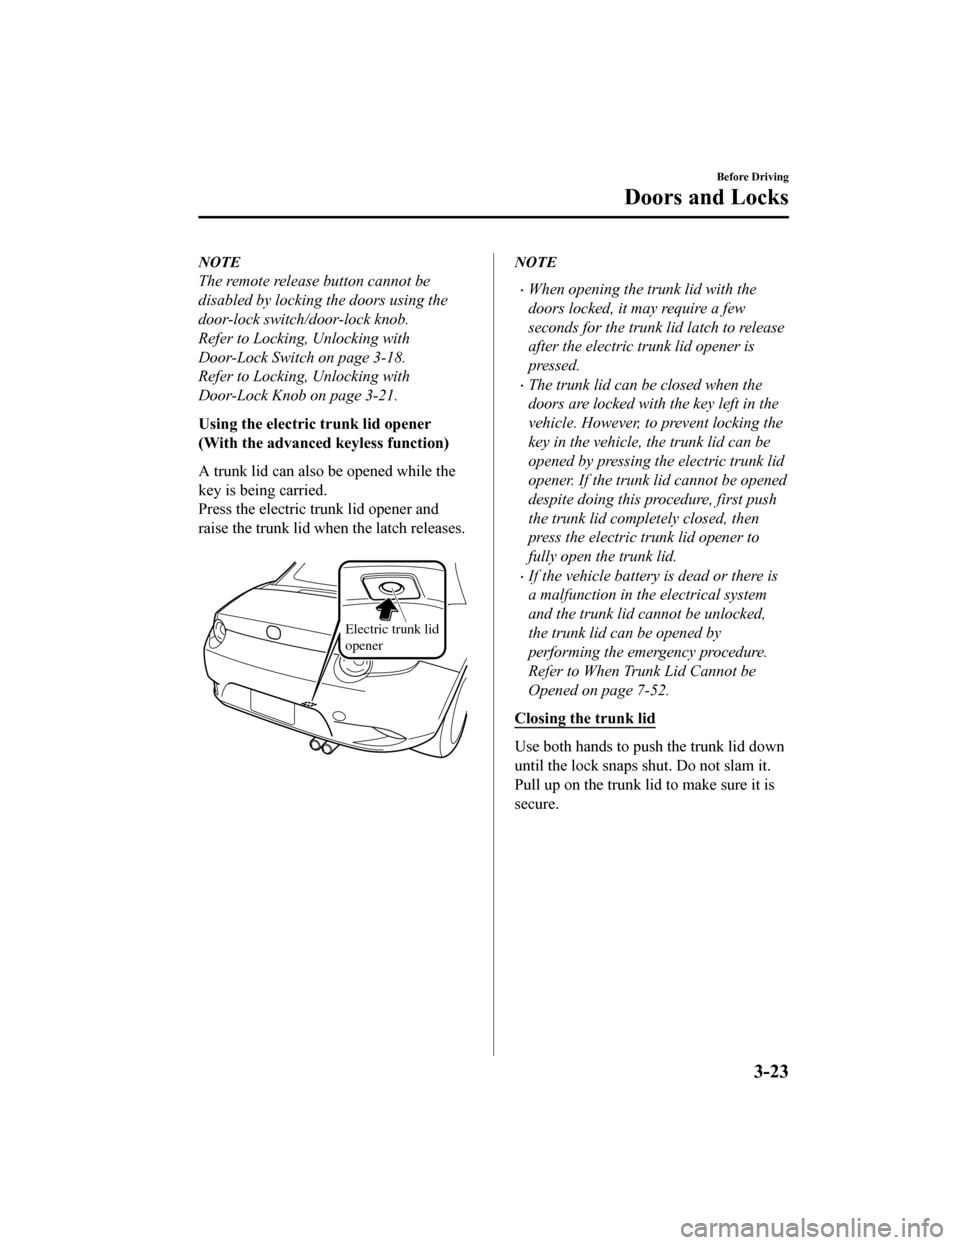 MAZDA MODEL MX-5 2020  Owners Manual (in English) NOTE
The remote release button cannot be
disabled by locking the doors using the
door-lock switch/door-lock knob.
Refer to Locking, Unlocking with
Door-Lock Switch on page 3-18.
Refer to Locking, Unlo